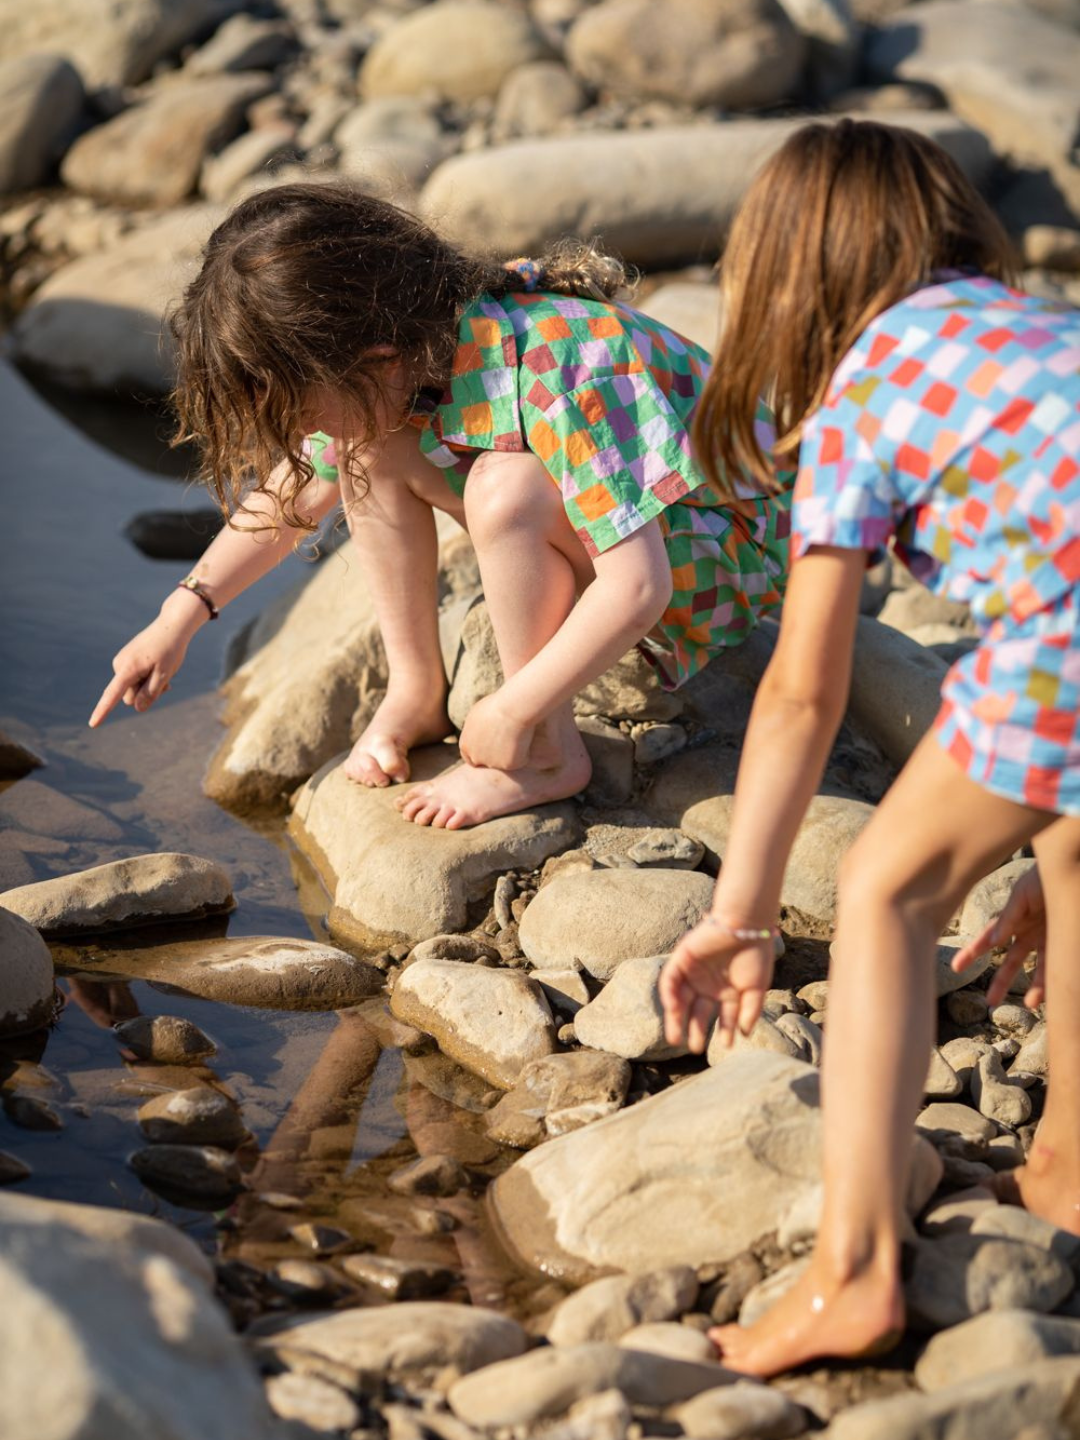 Blue | Two children by the water wearing kids' shirt and shorts sets in two different colorways: one with gold, orange, pink and purple squares on a green background; one with red, orange, pink, lilac and green squares on a blue background